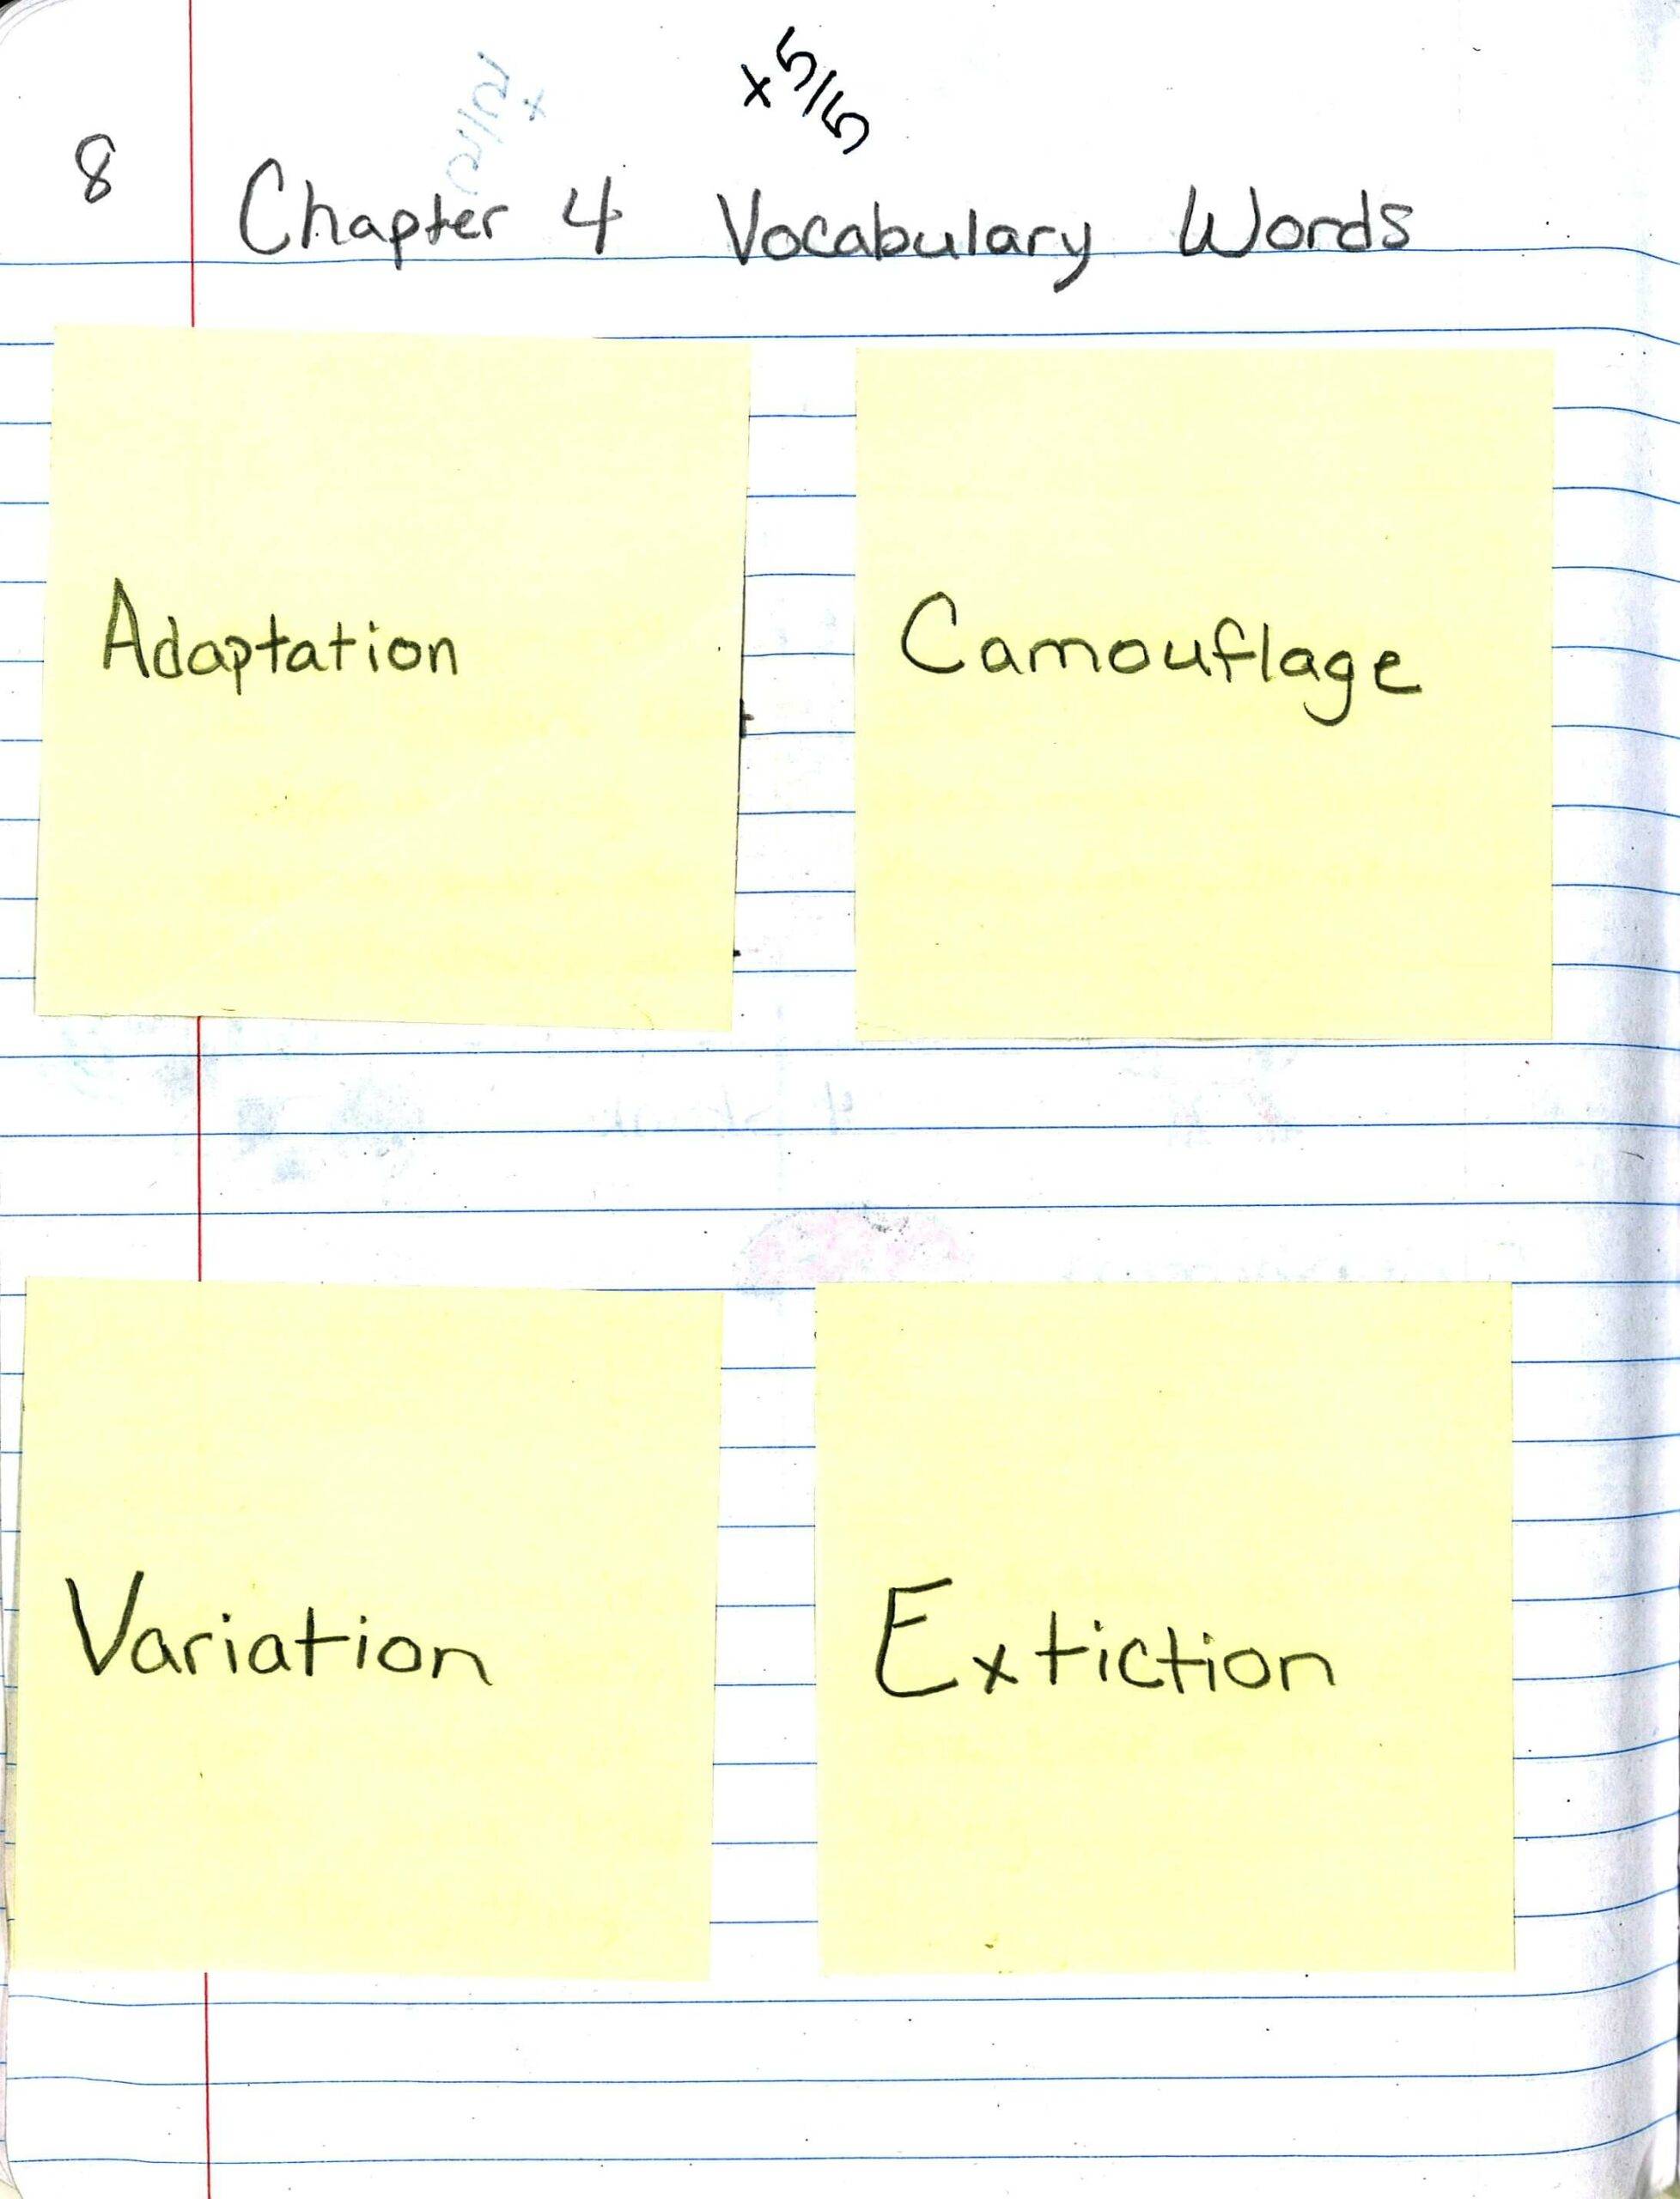 Note-Taking Vocabulary Words - Sticky Note Over Definition